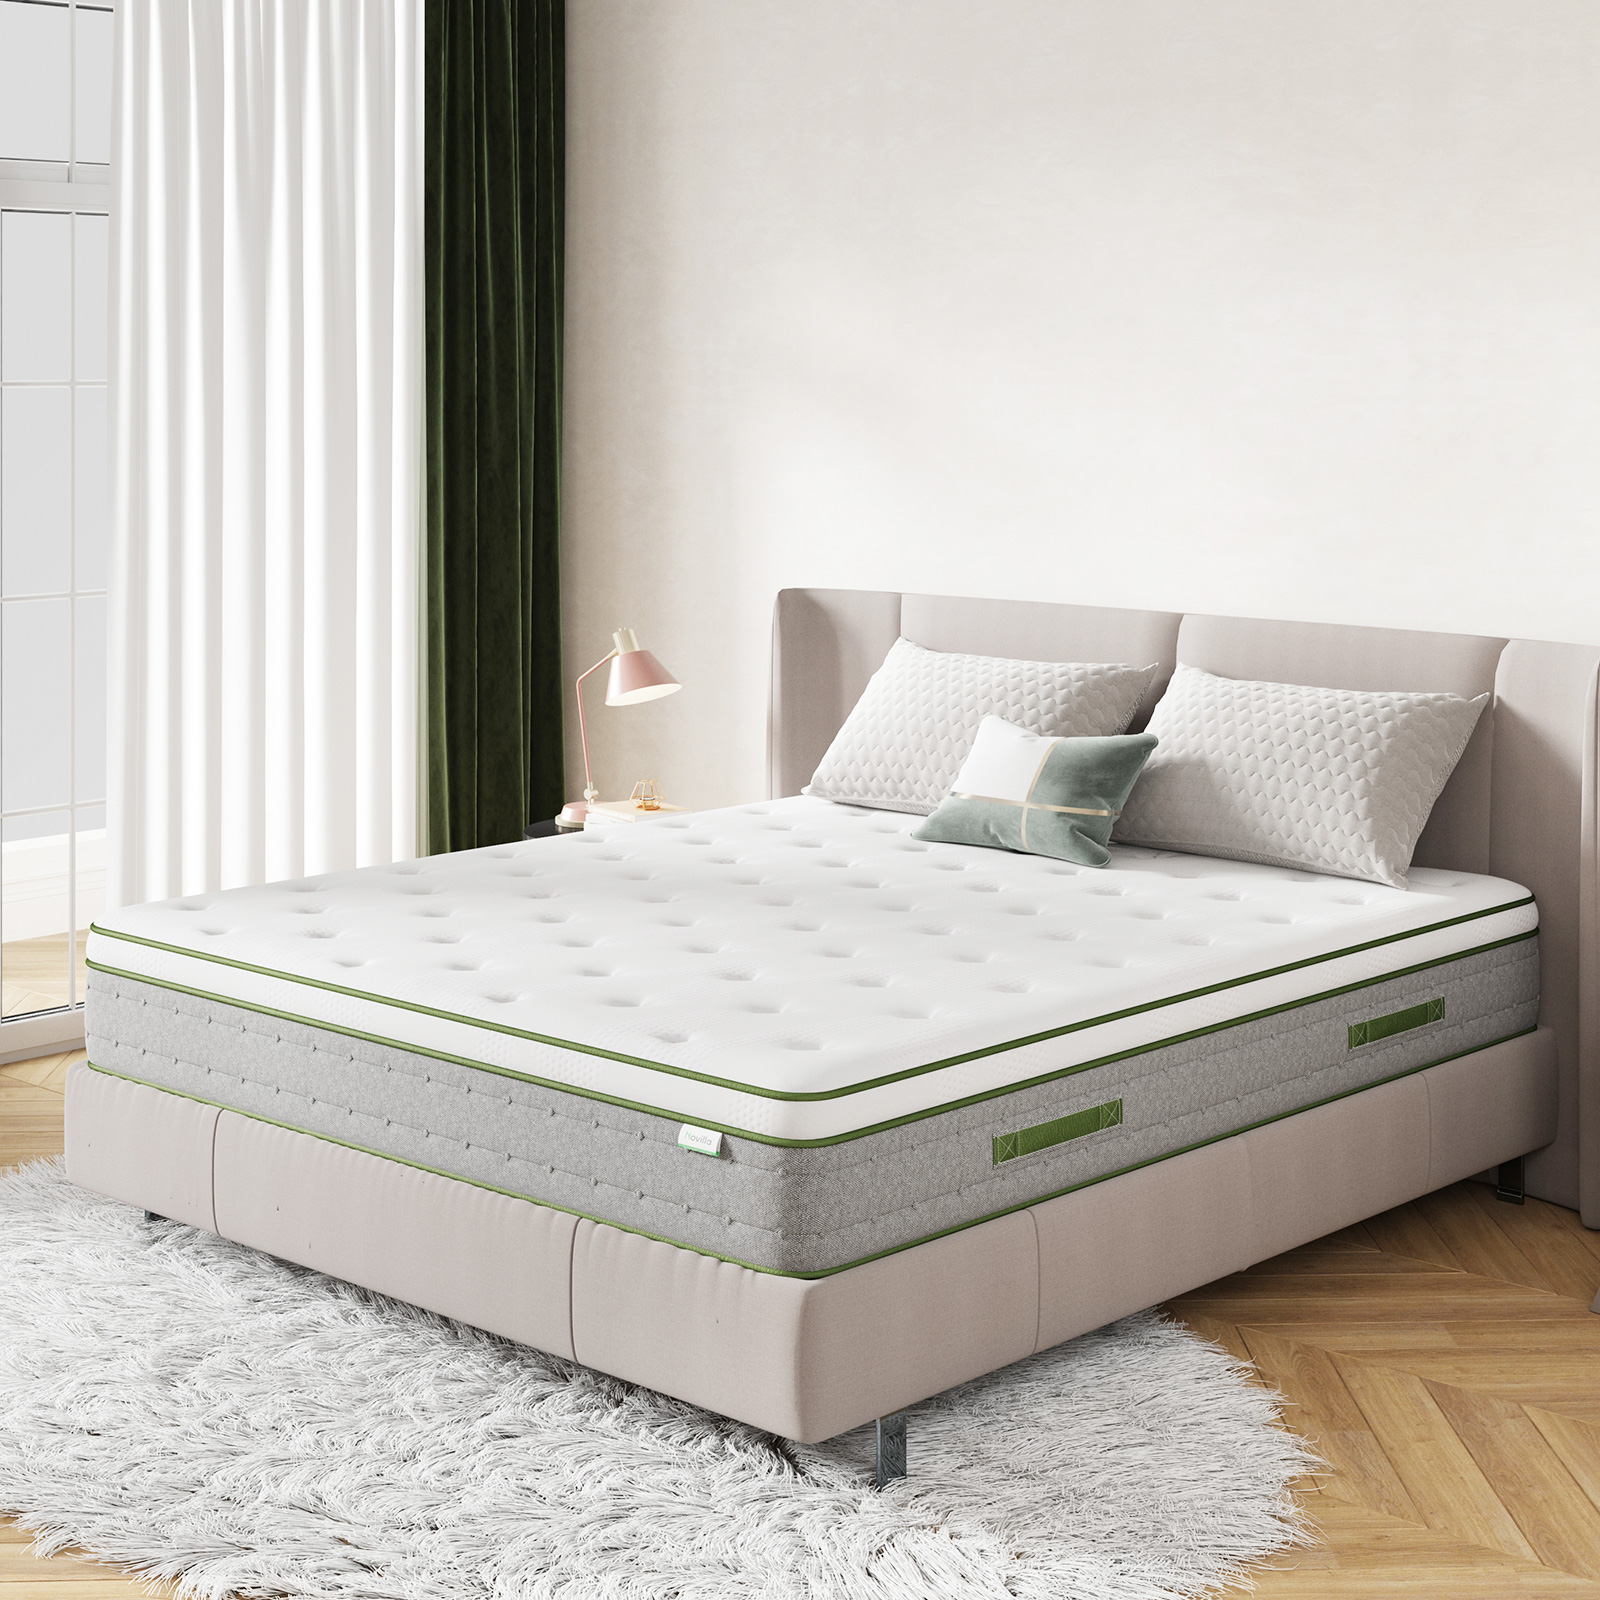  5 Benefits of a Hybrid Mattress: What You Need to Know; If you're looking for a comfortable and durable mattress, consider a hybrid mattress. 